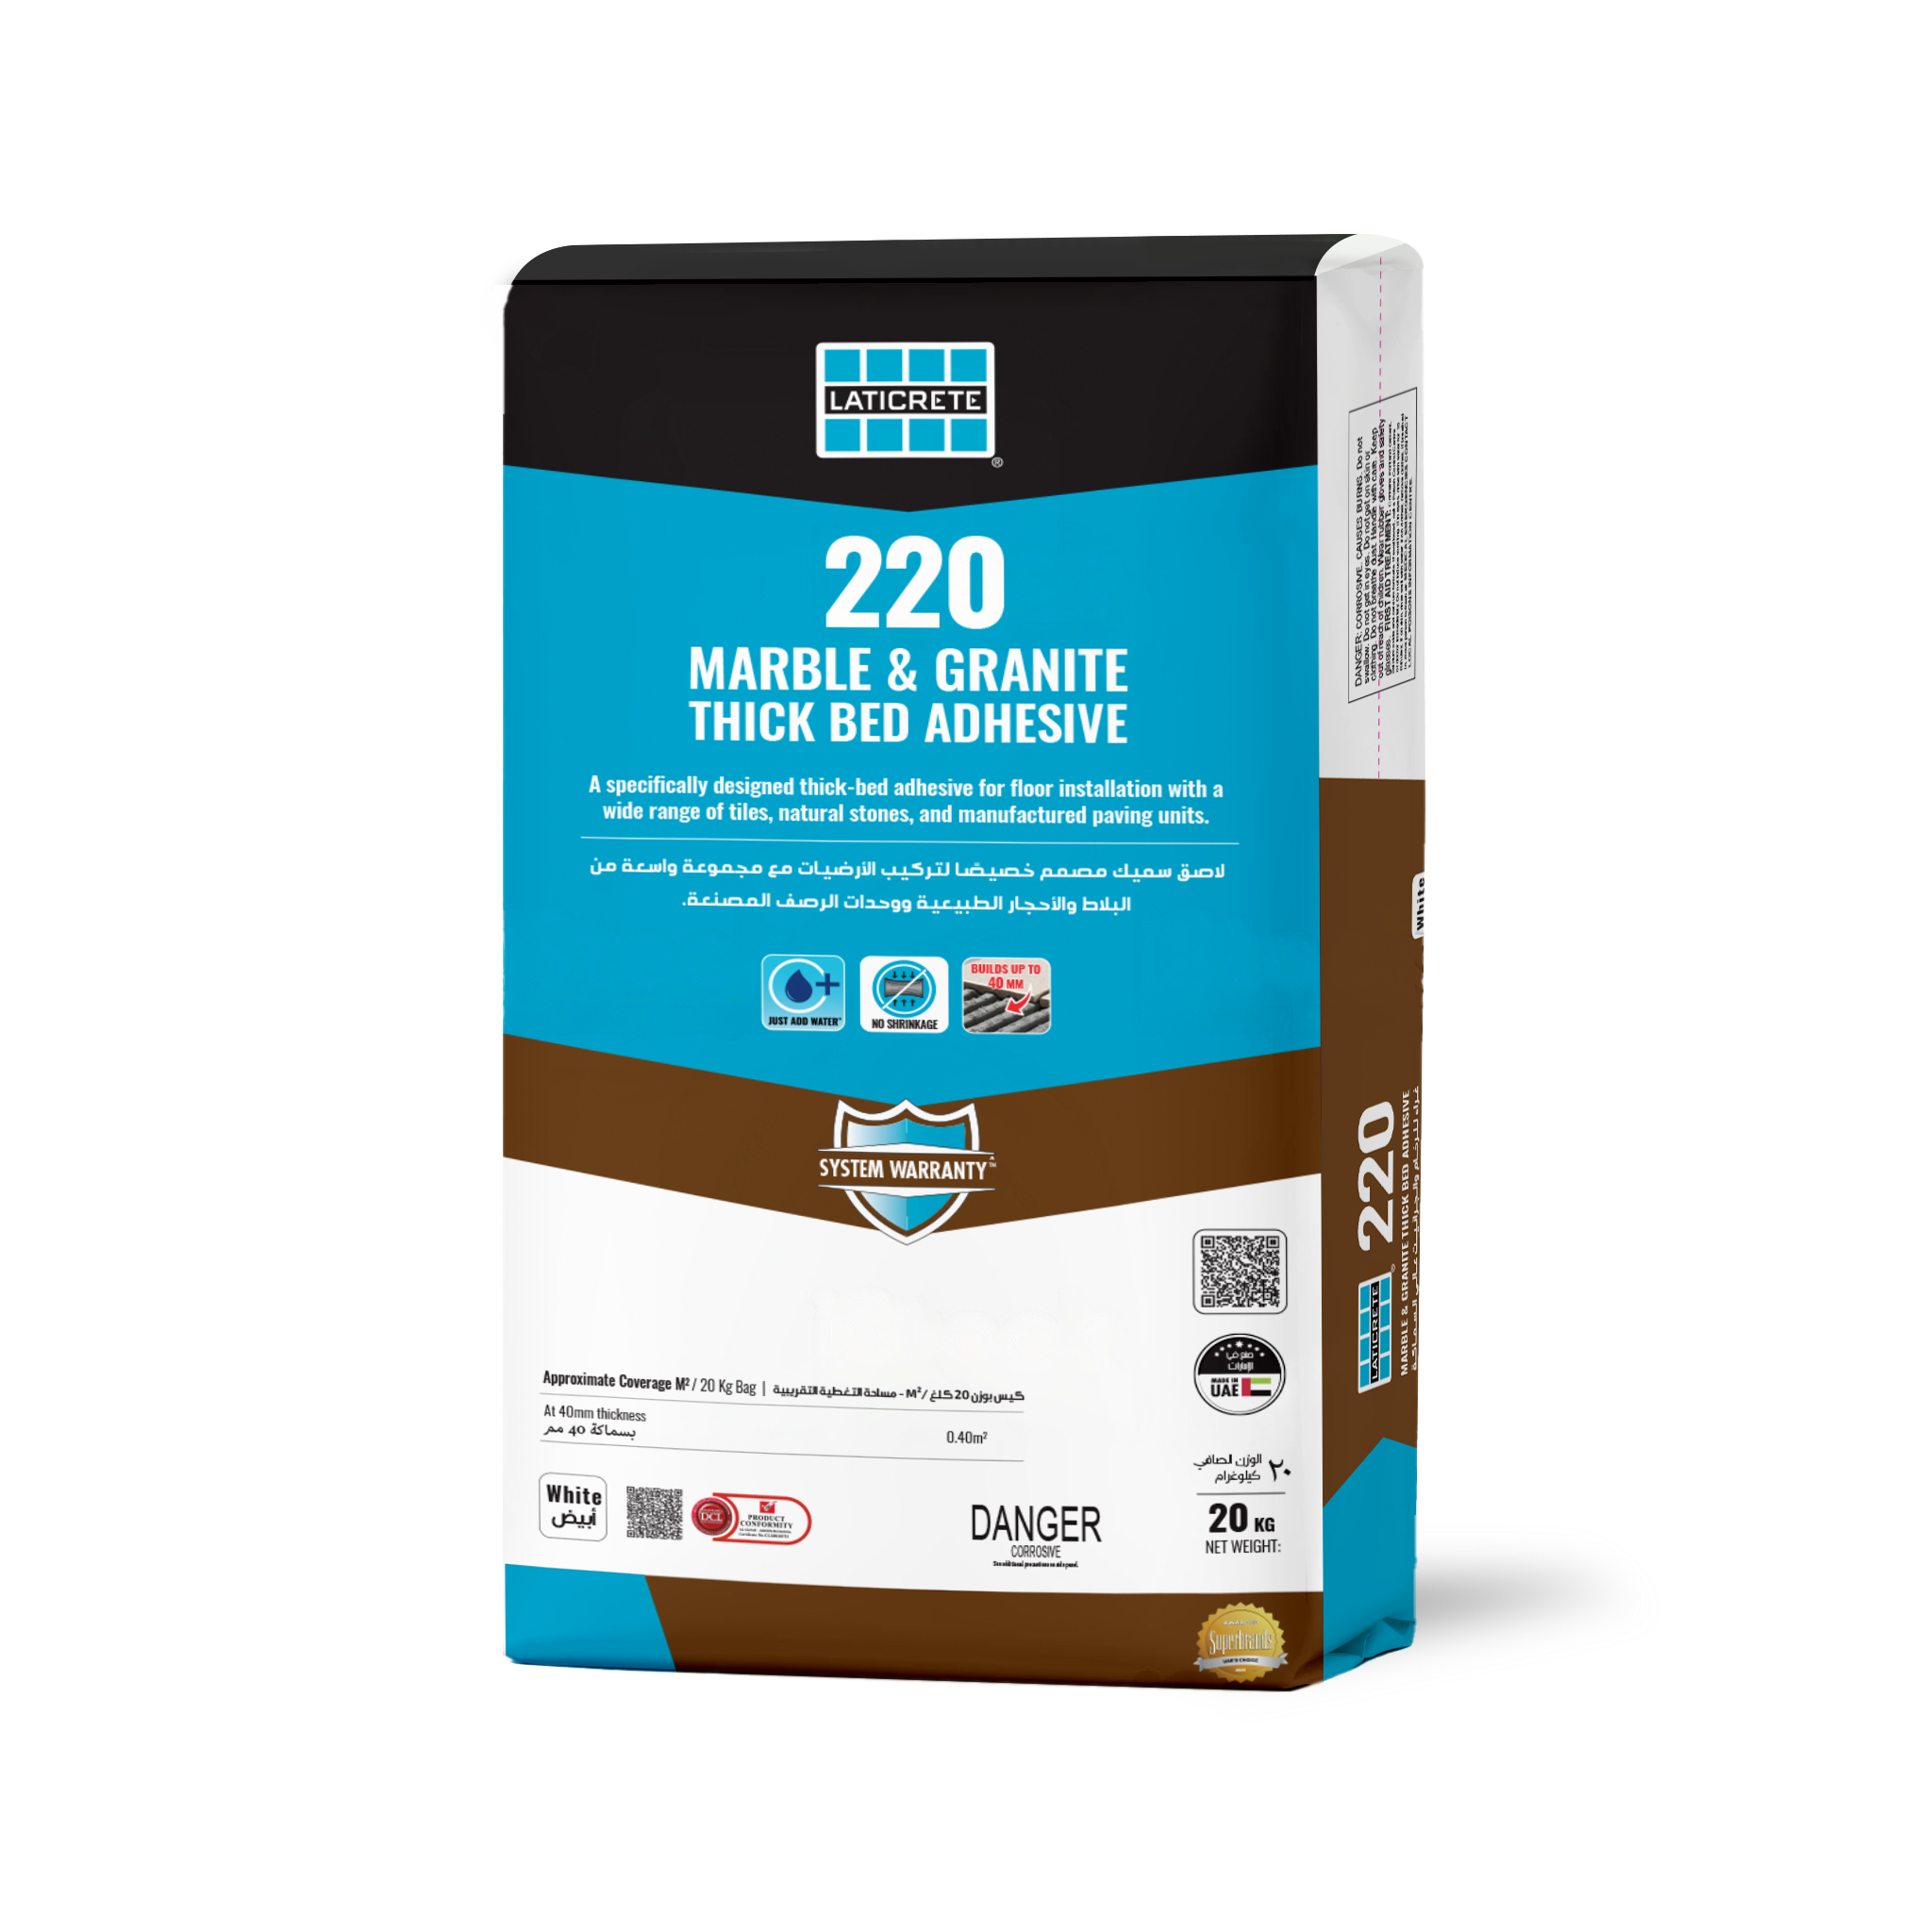 220 Marble & Granite Thick Bed Adhesive